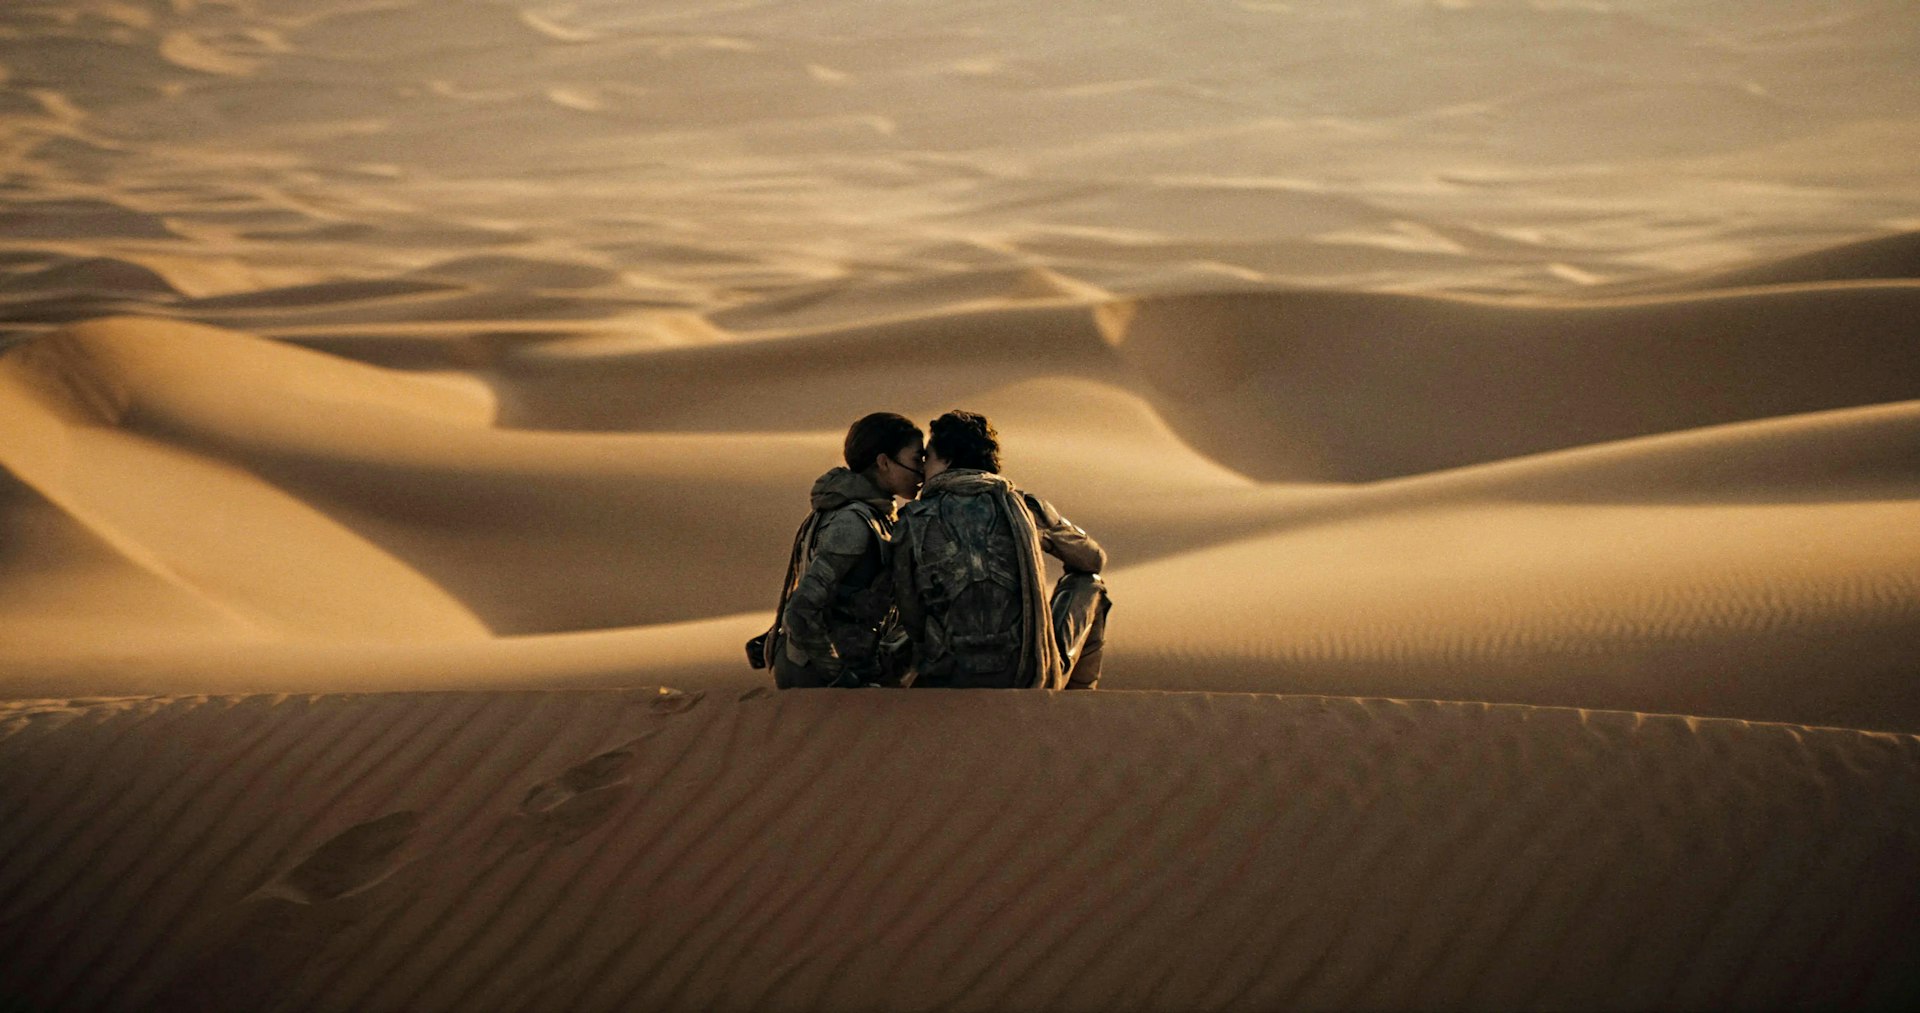 Two people sitting on sand dunes in a vast desert lean in to kiss